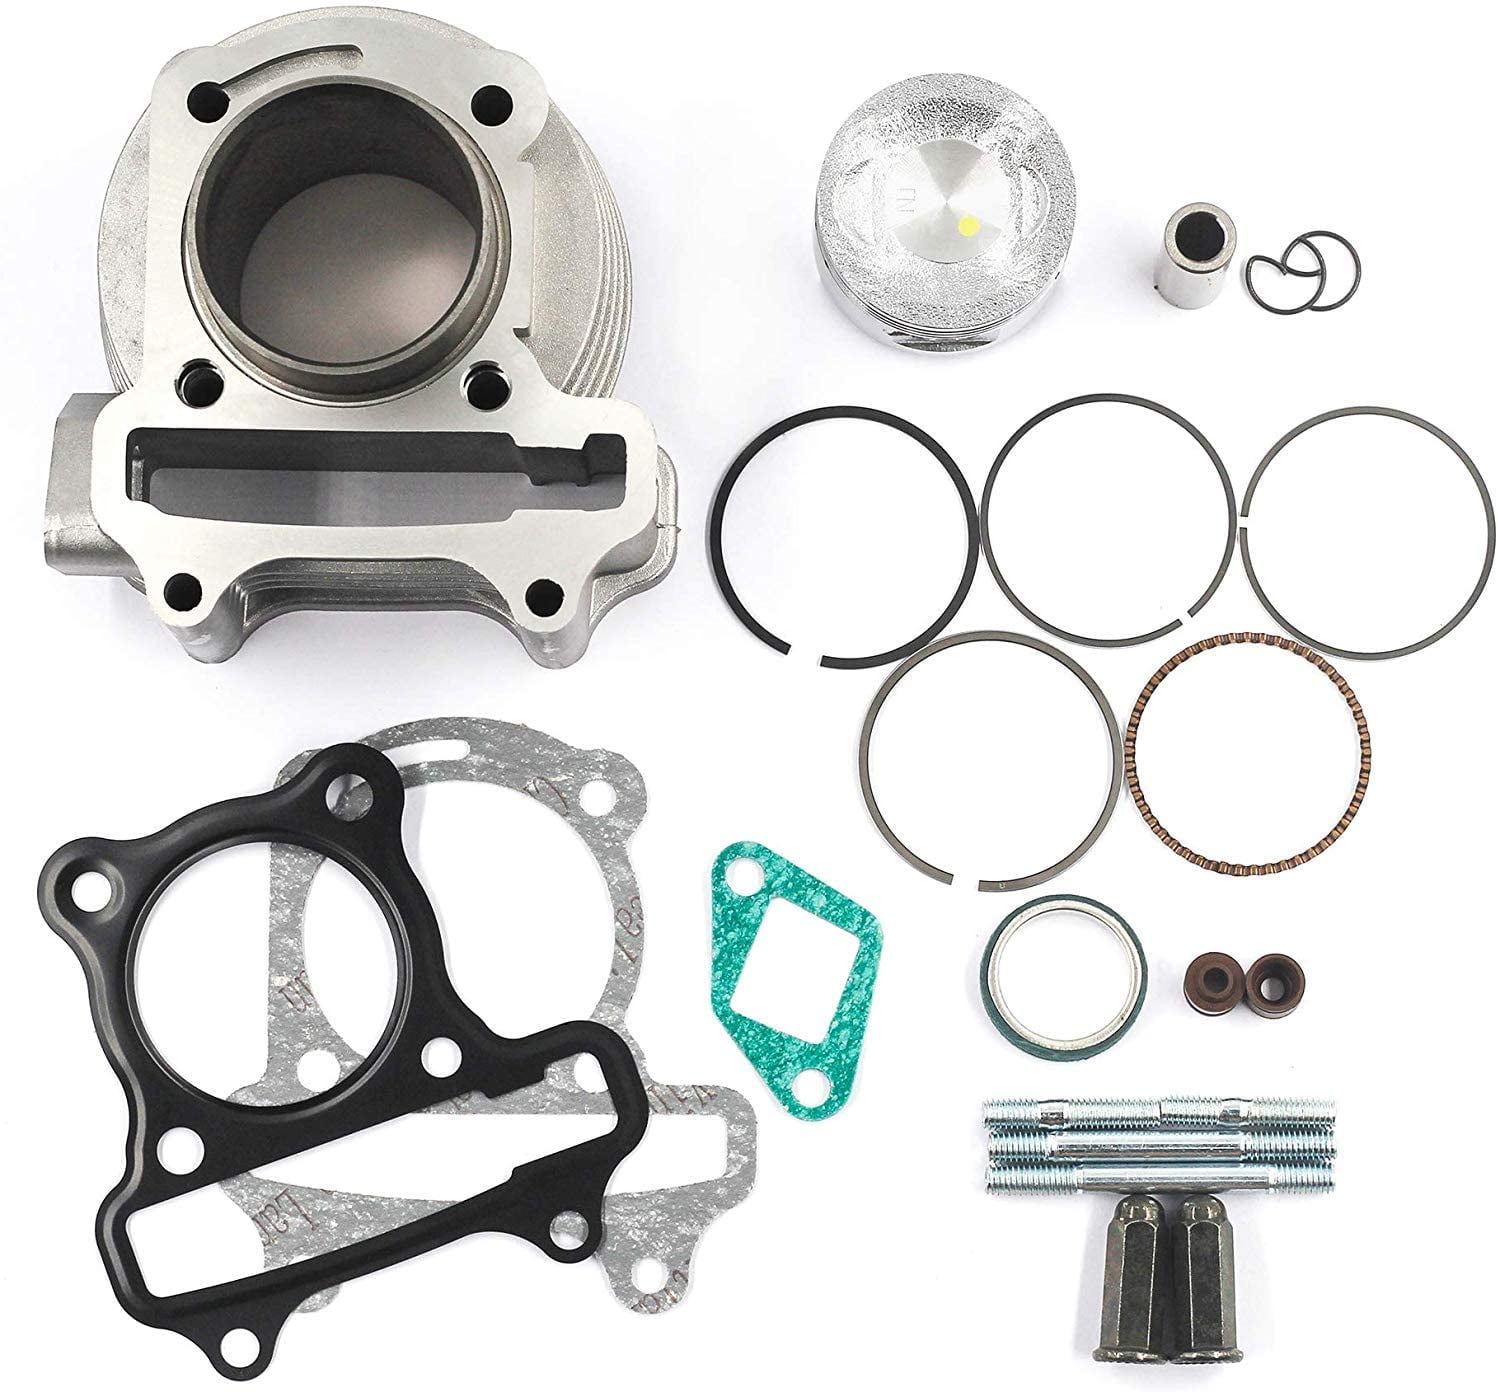 Scooters GY6 157QMJ MYK 125cc/150cc to 155cc Big Bore Cylinder Kit 58.5mm 